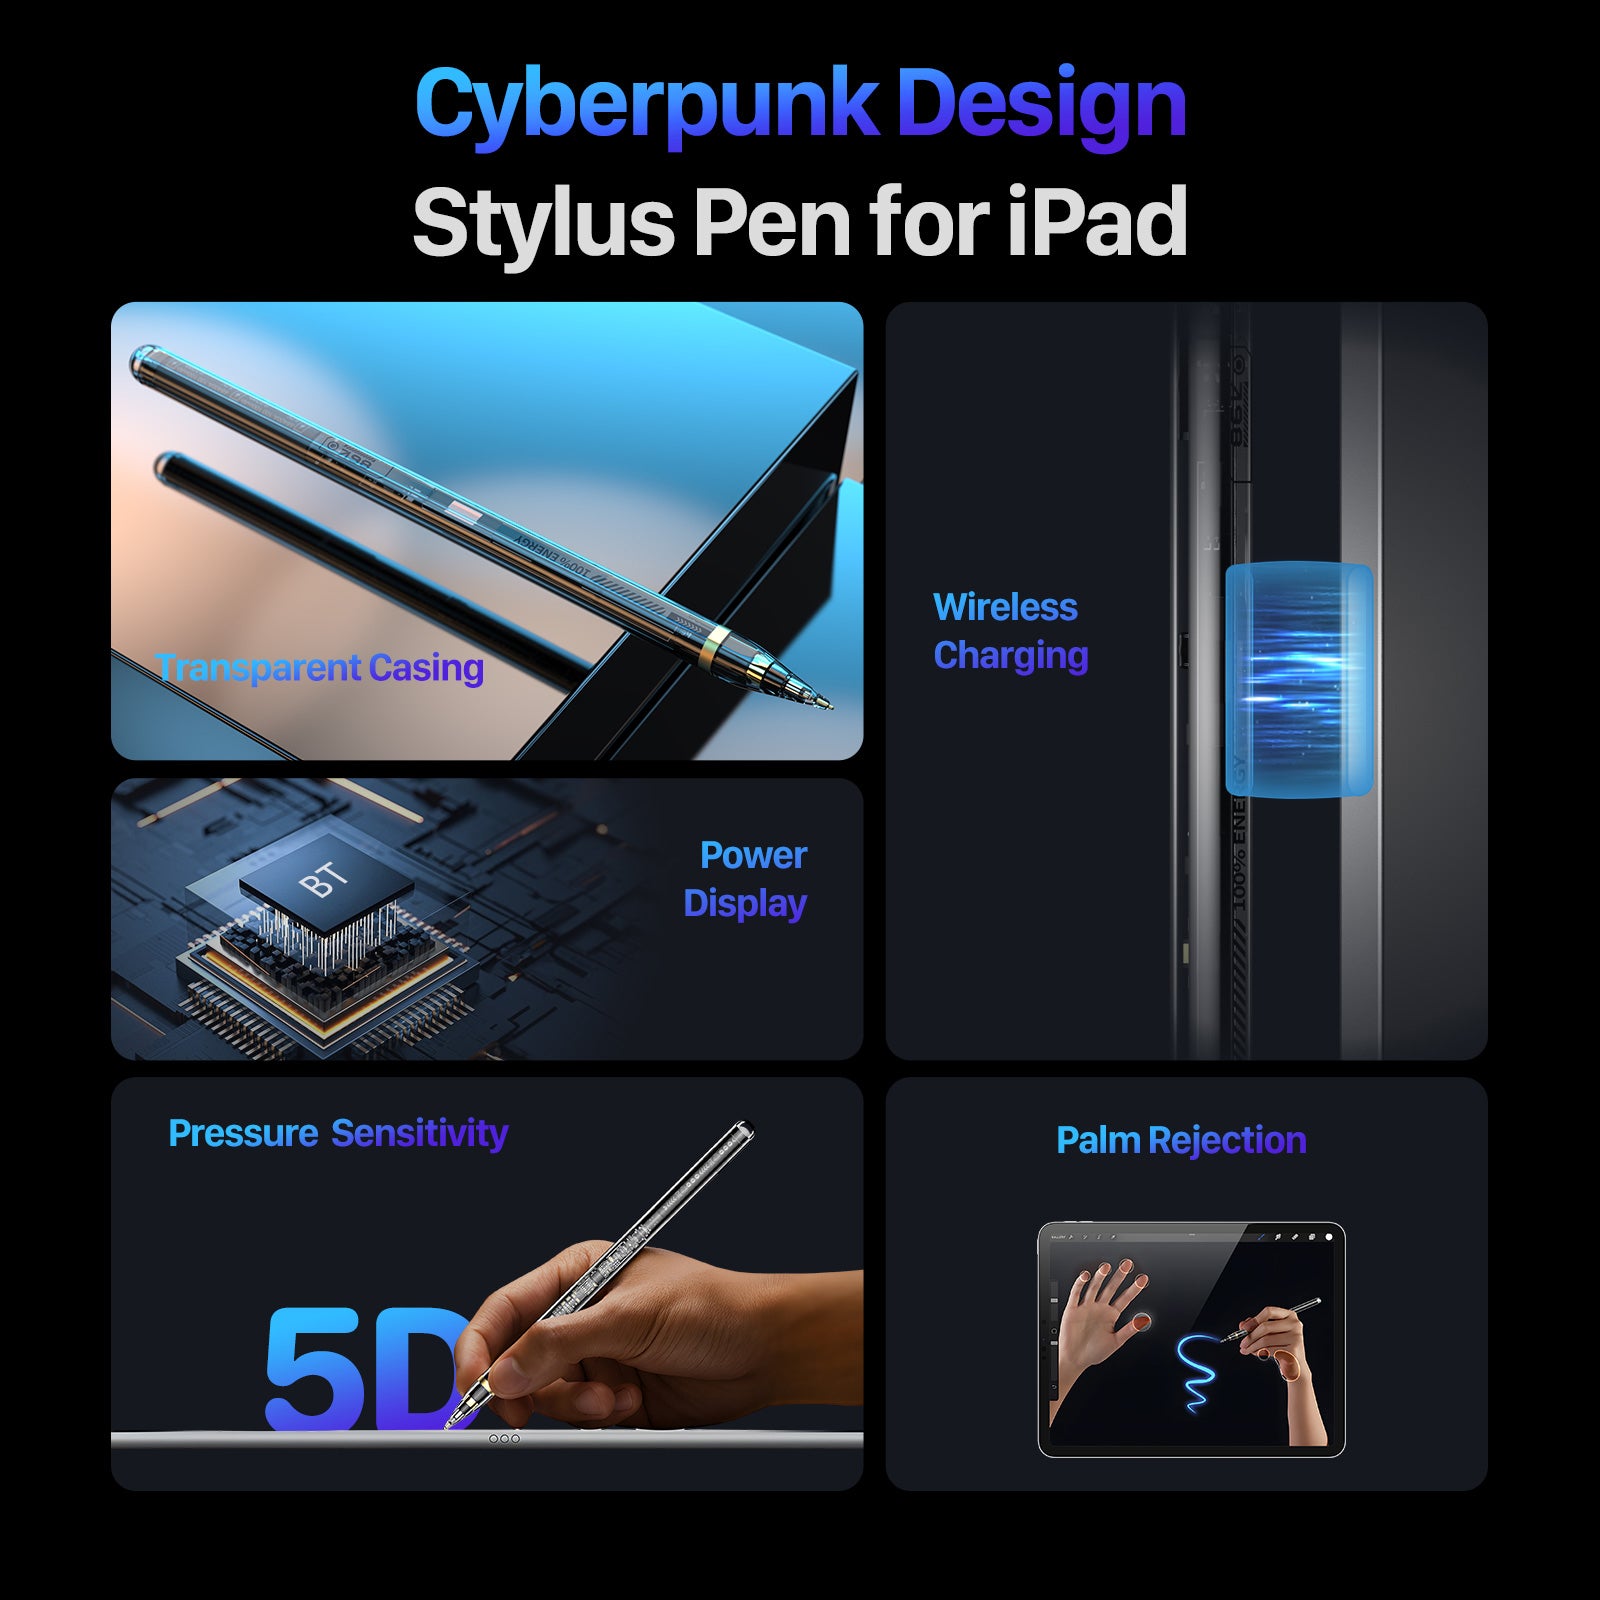 Magnetic Charging Stylus Pen for iPad High Precision Capacitive Universal Digital Active Pencil - Transparent